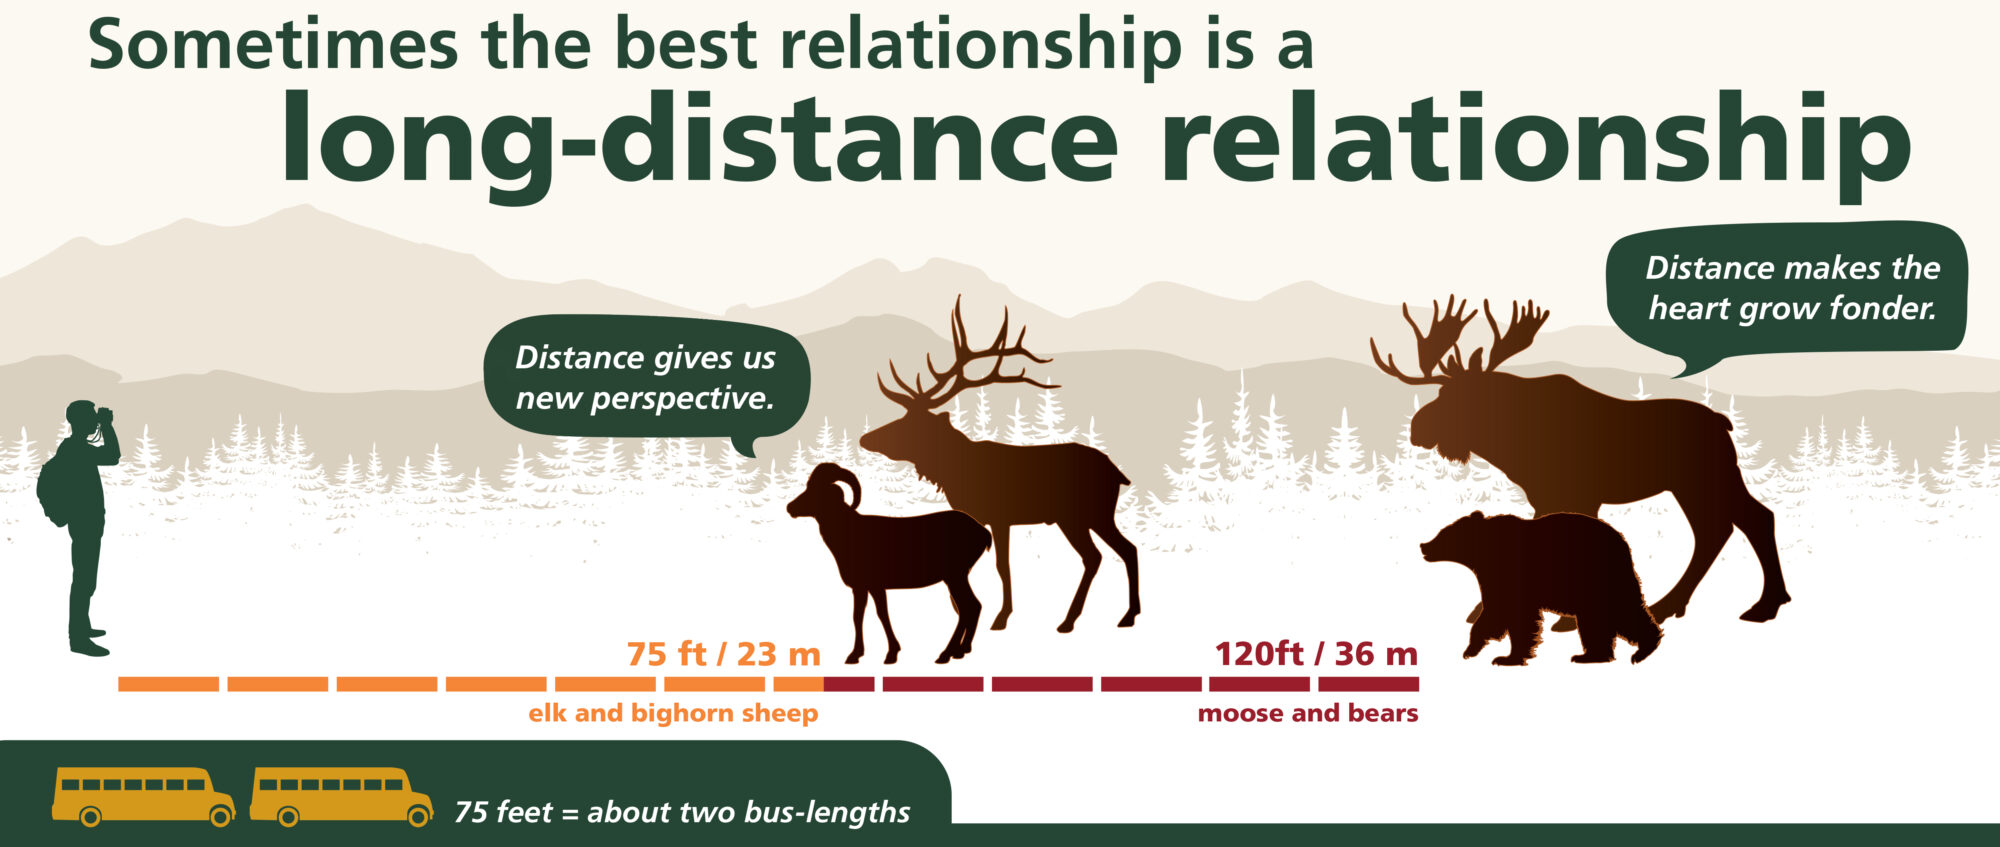 A graphic shows the distance to keep from certain wildlife as part of the 7 principles of leave no trace. Elk are 75 feet and moose/bears are 120 feet.